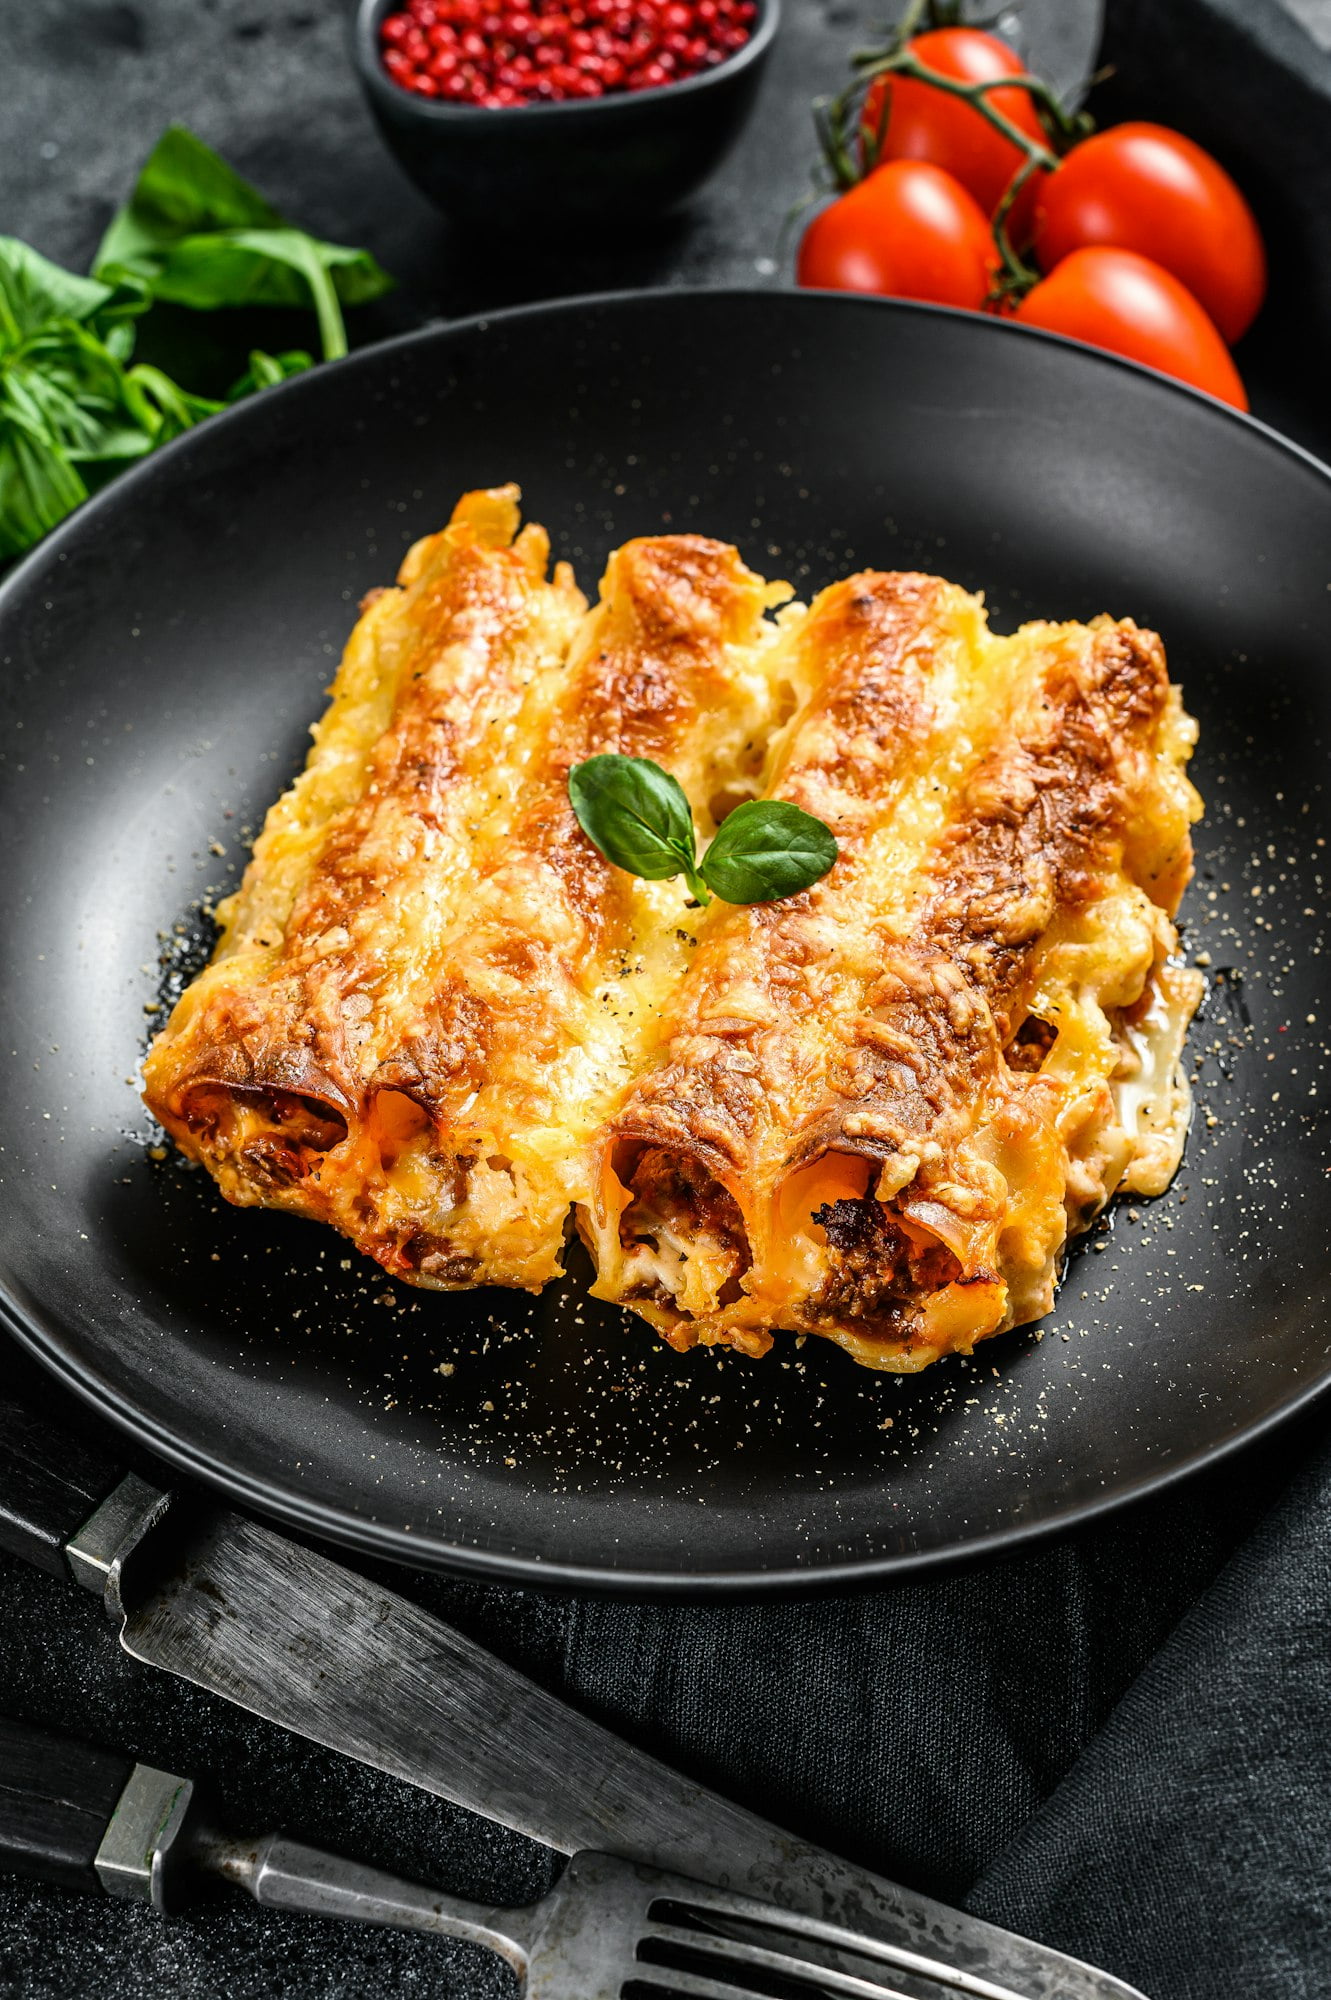 Italian homemade pasta cannelloni with beef and tomato sauce. Black background. top view